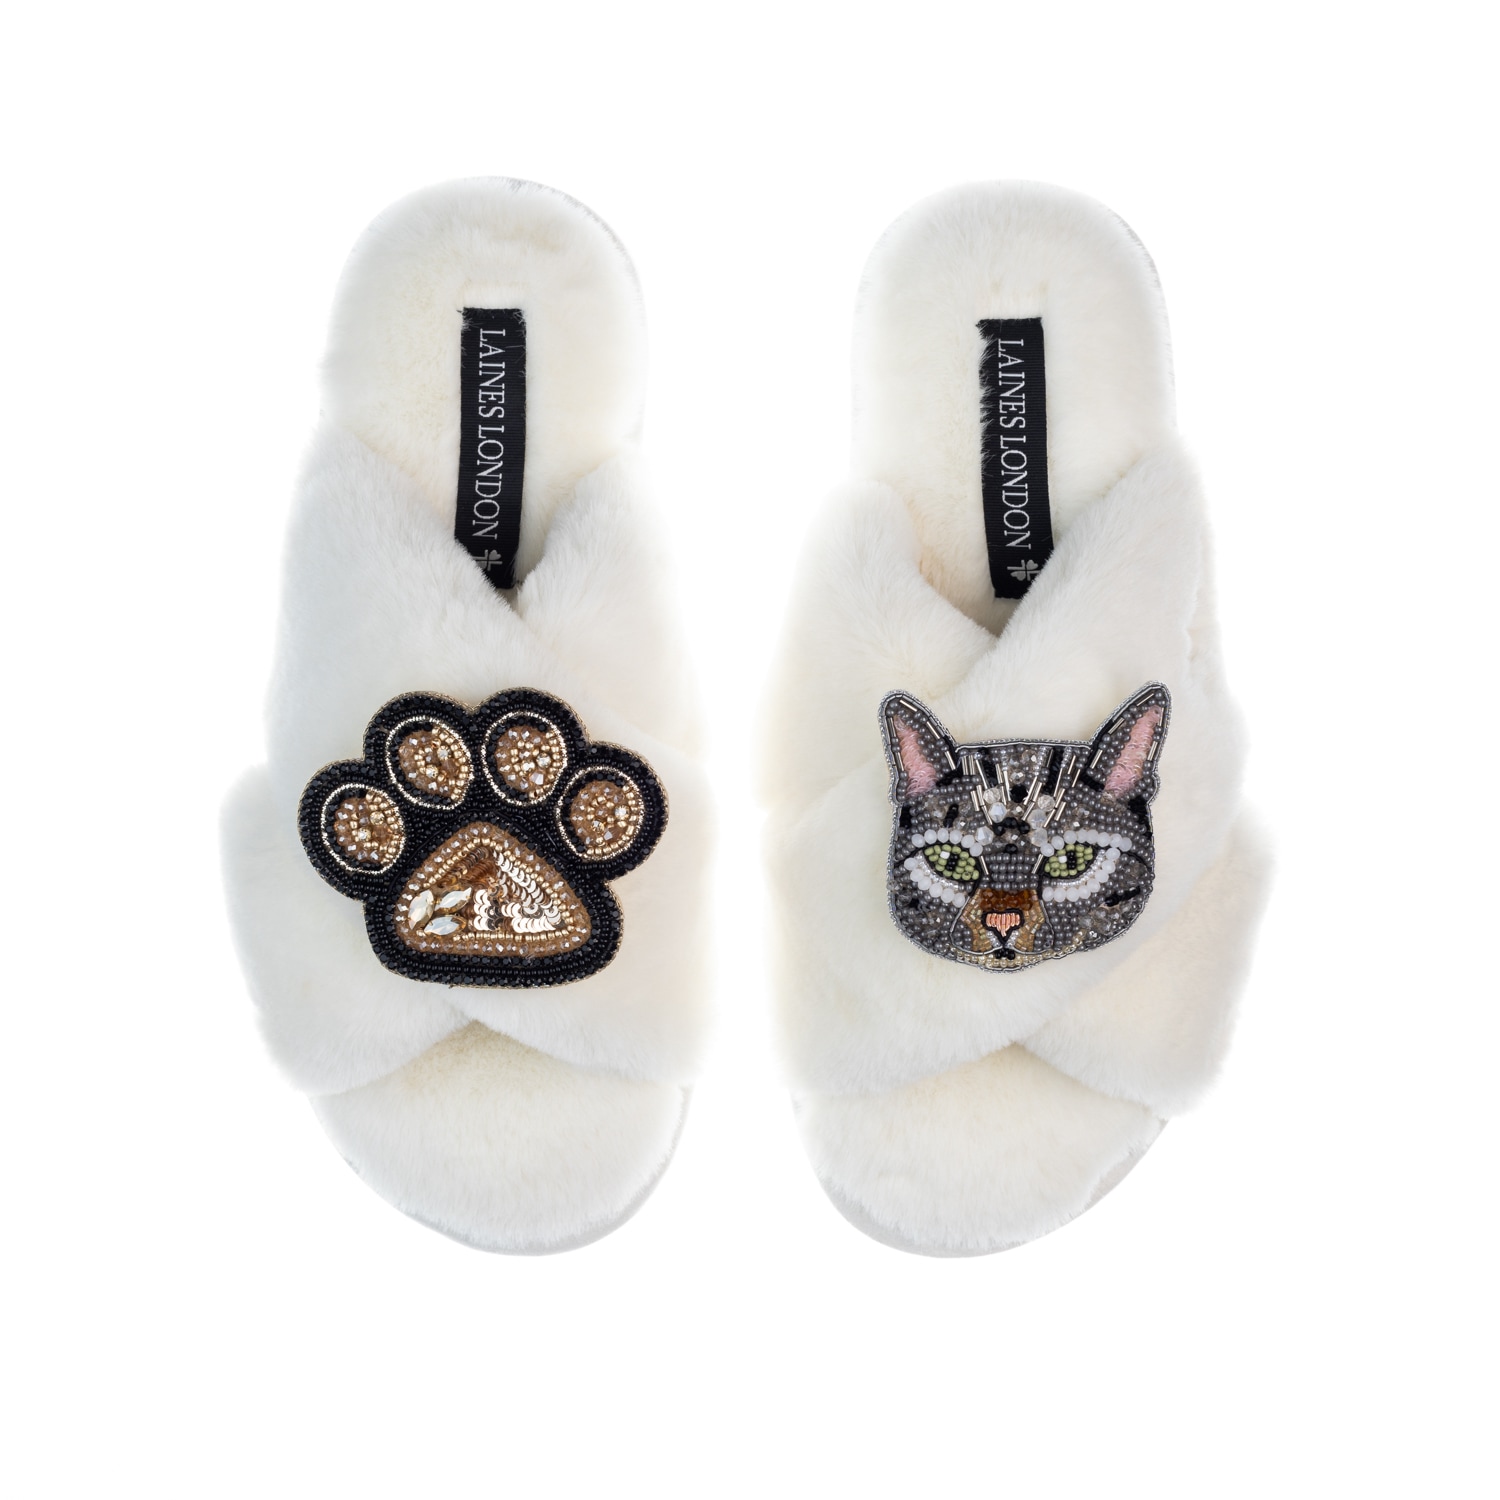 Laines London Women's White Classic Laines Slippers With Grey Pebbles Cat & Paw Brooches - Cream